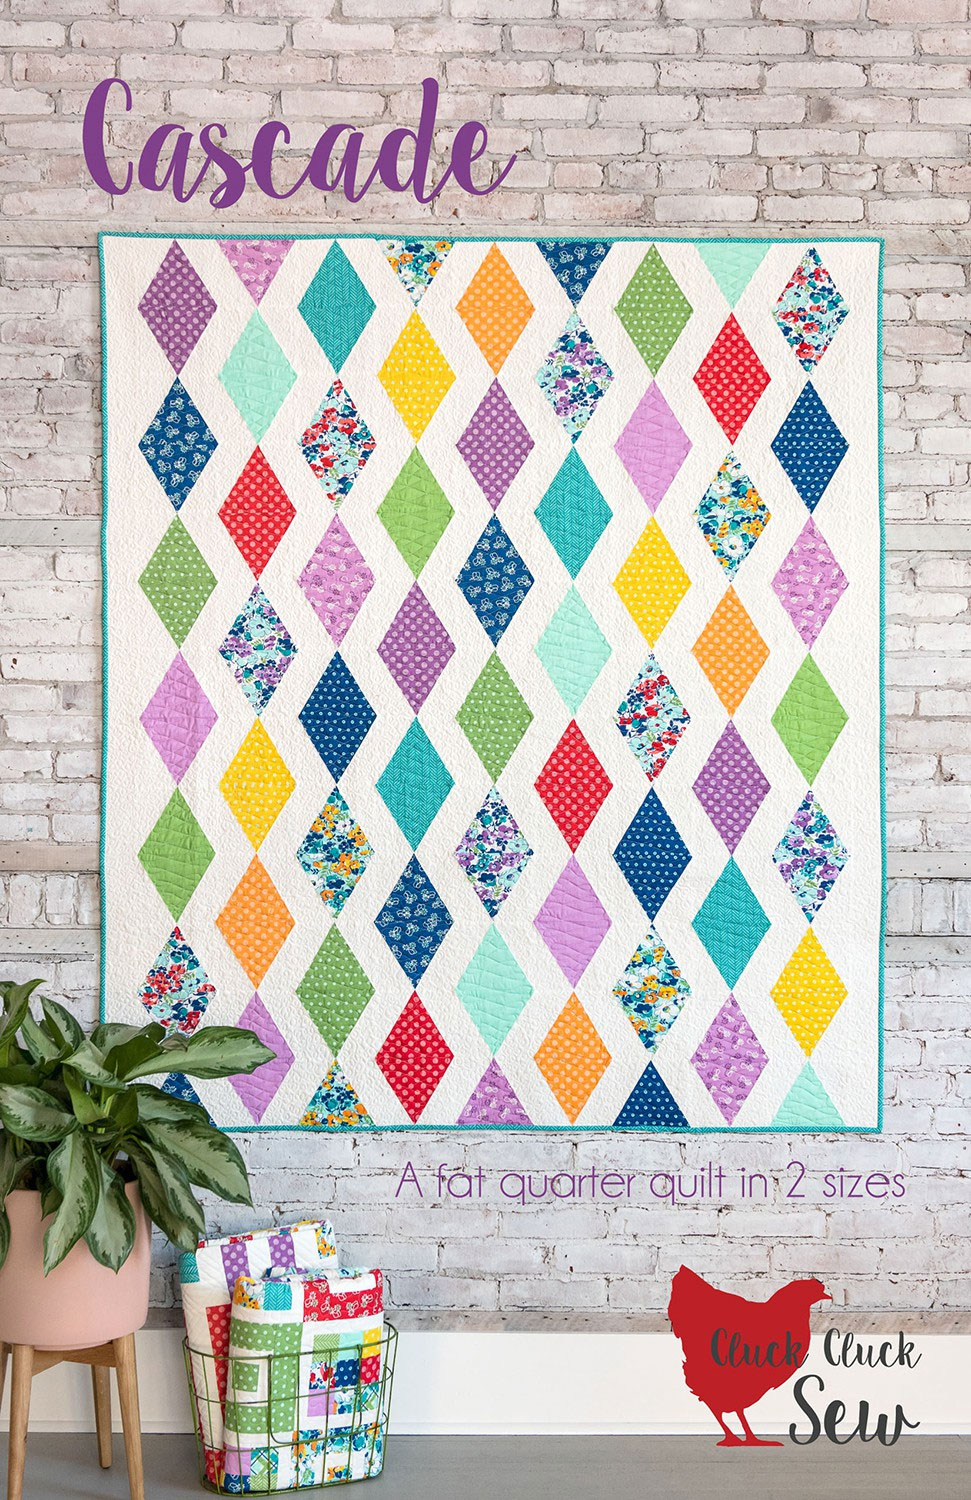 Cascade-quilt-sewing-pattern-Cluck-Cluck-Sew-front